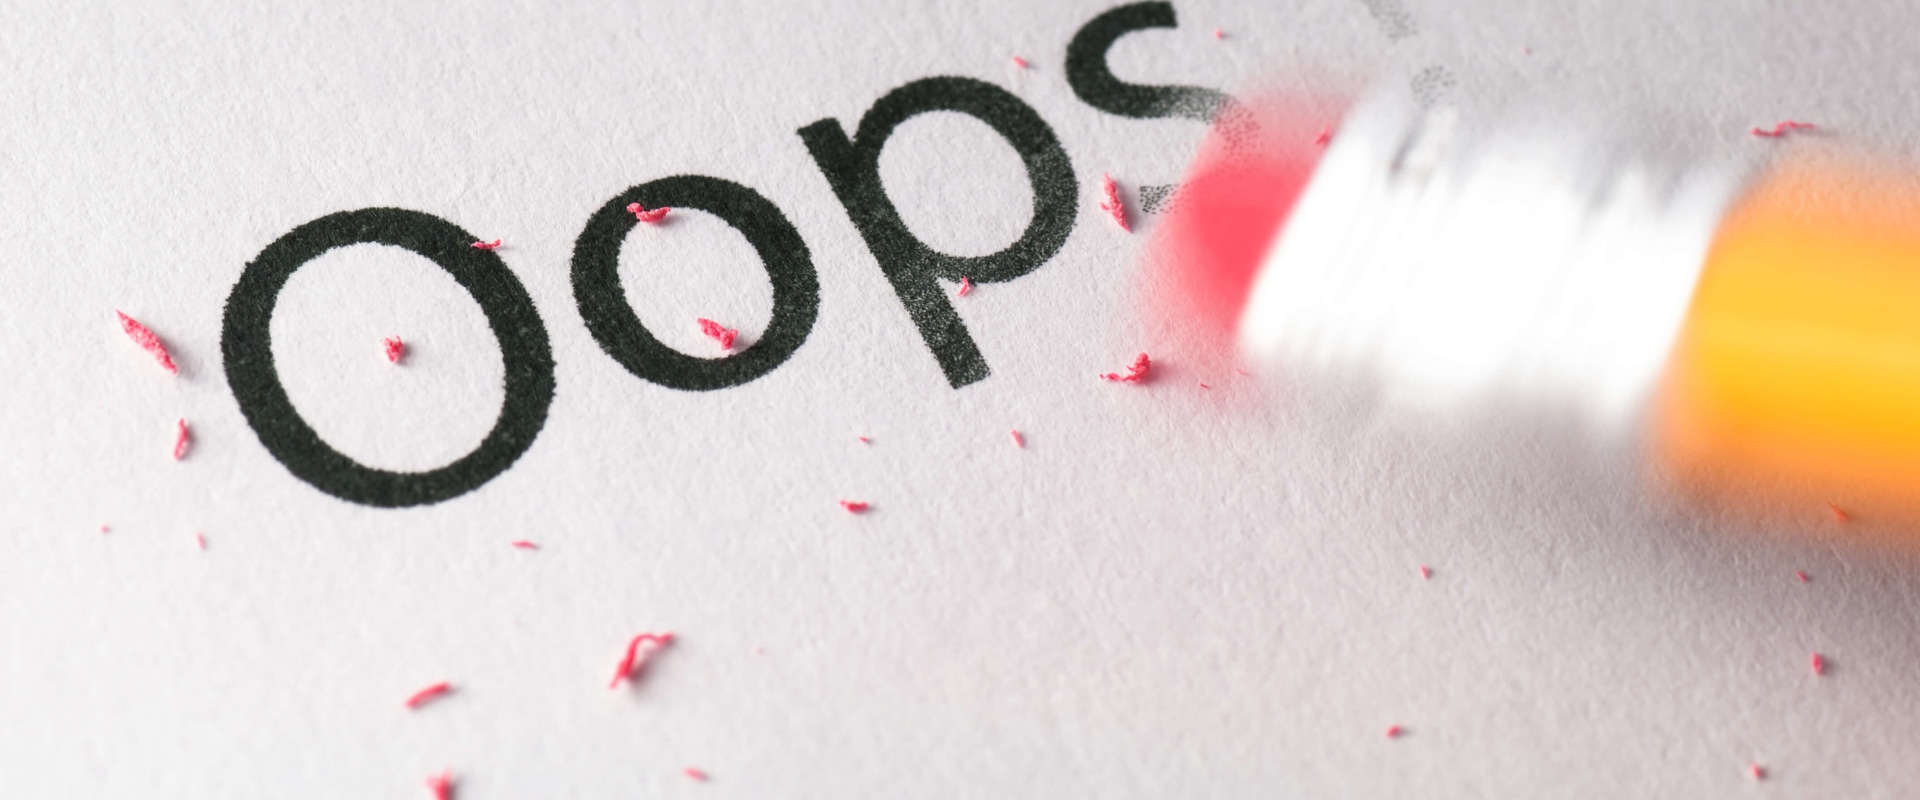 11 Common Mistakes to Avoid When Writing a Business Plan